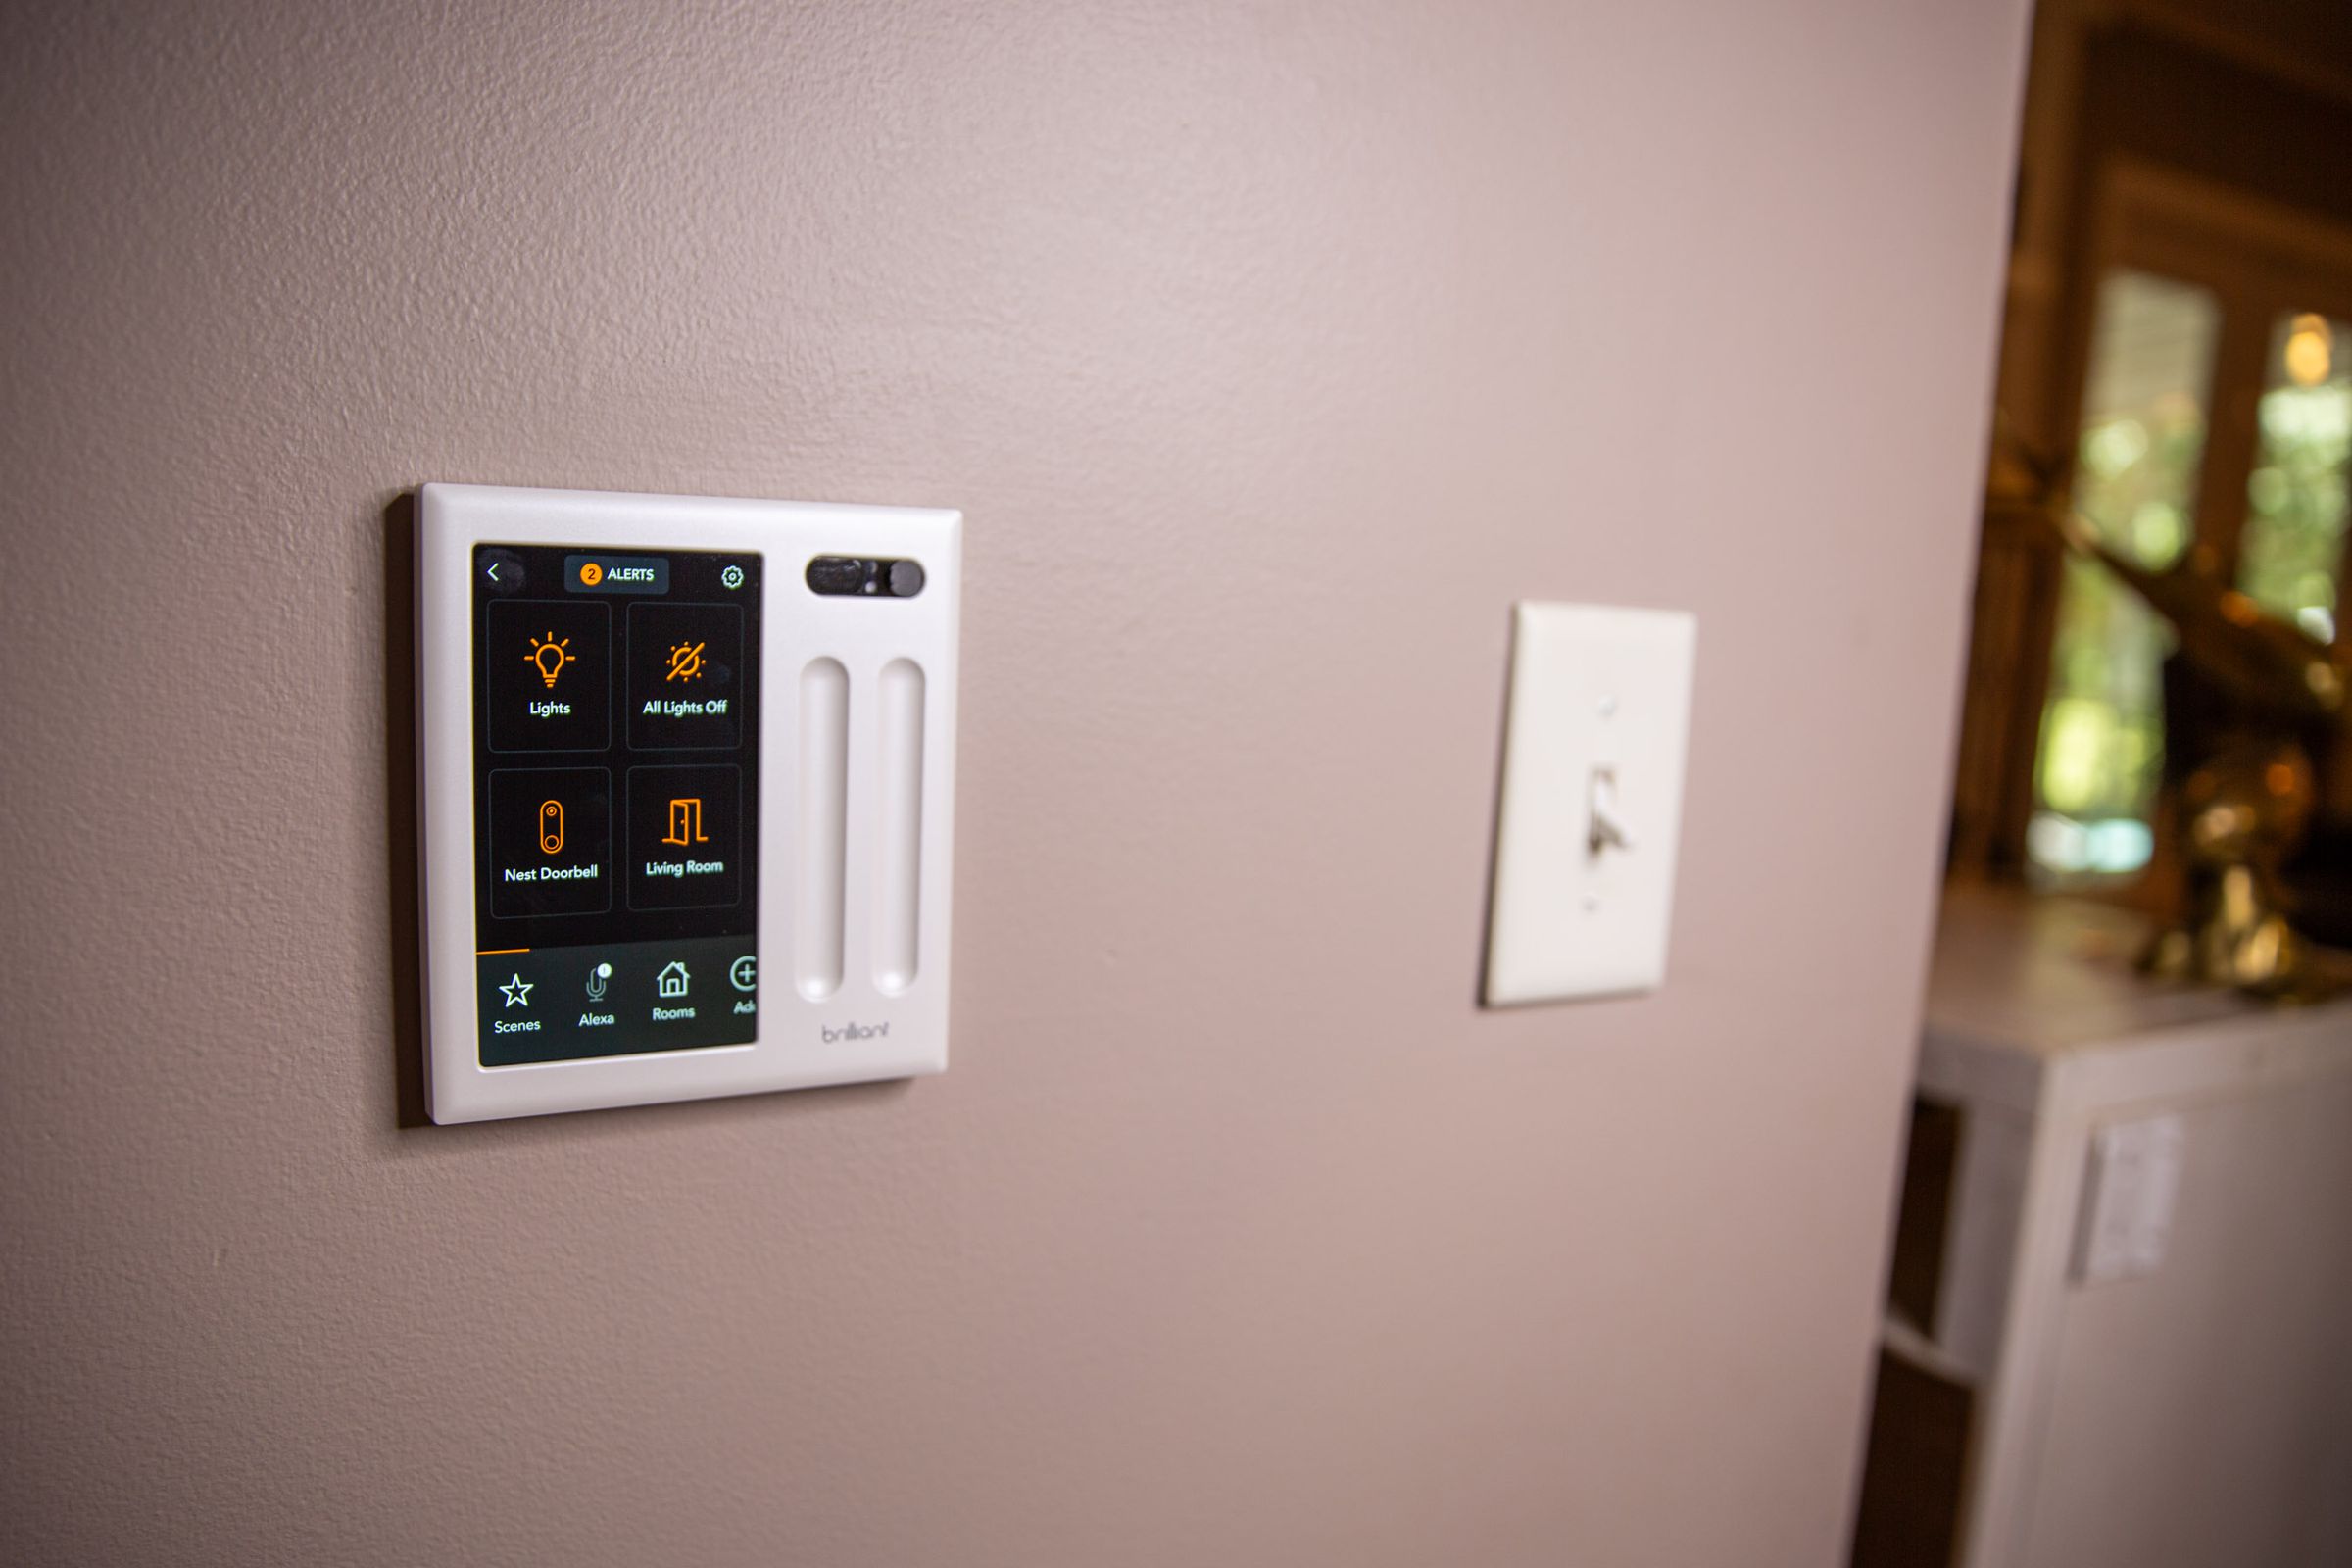 The Brilliant Smart Home Controller (left) paired a touchscreen panel with a physical dimmer switch for controlling hardwired lights. 